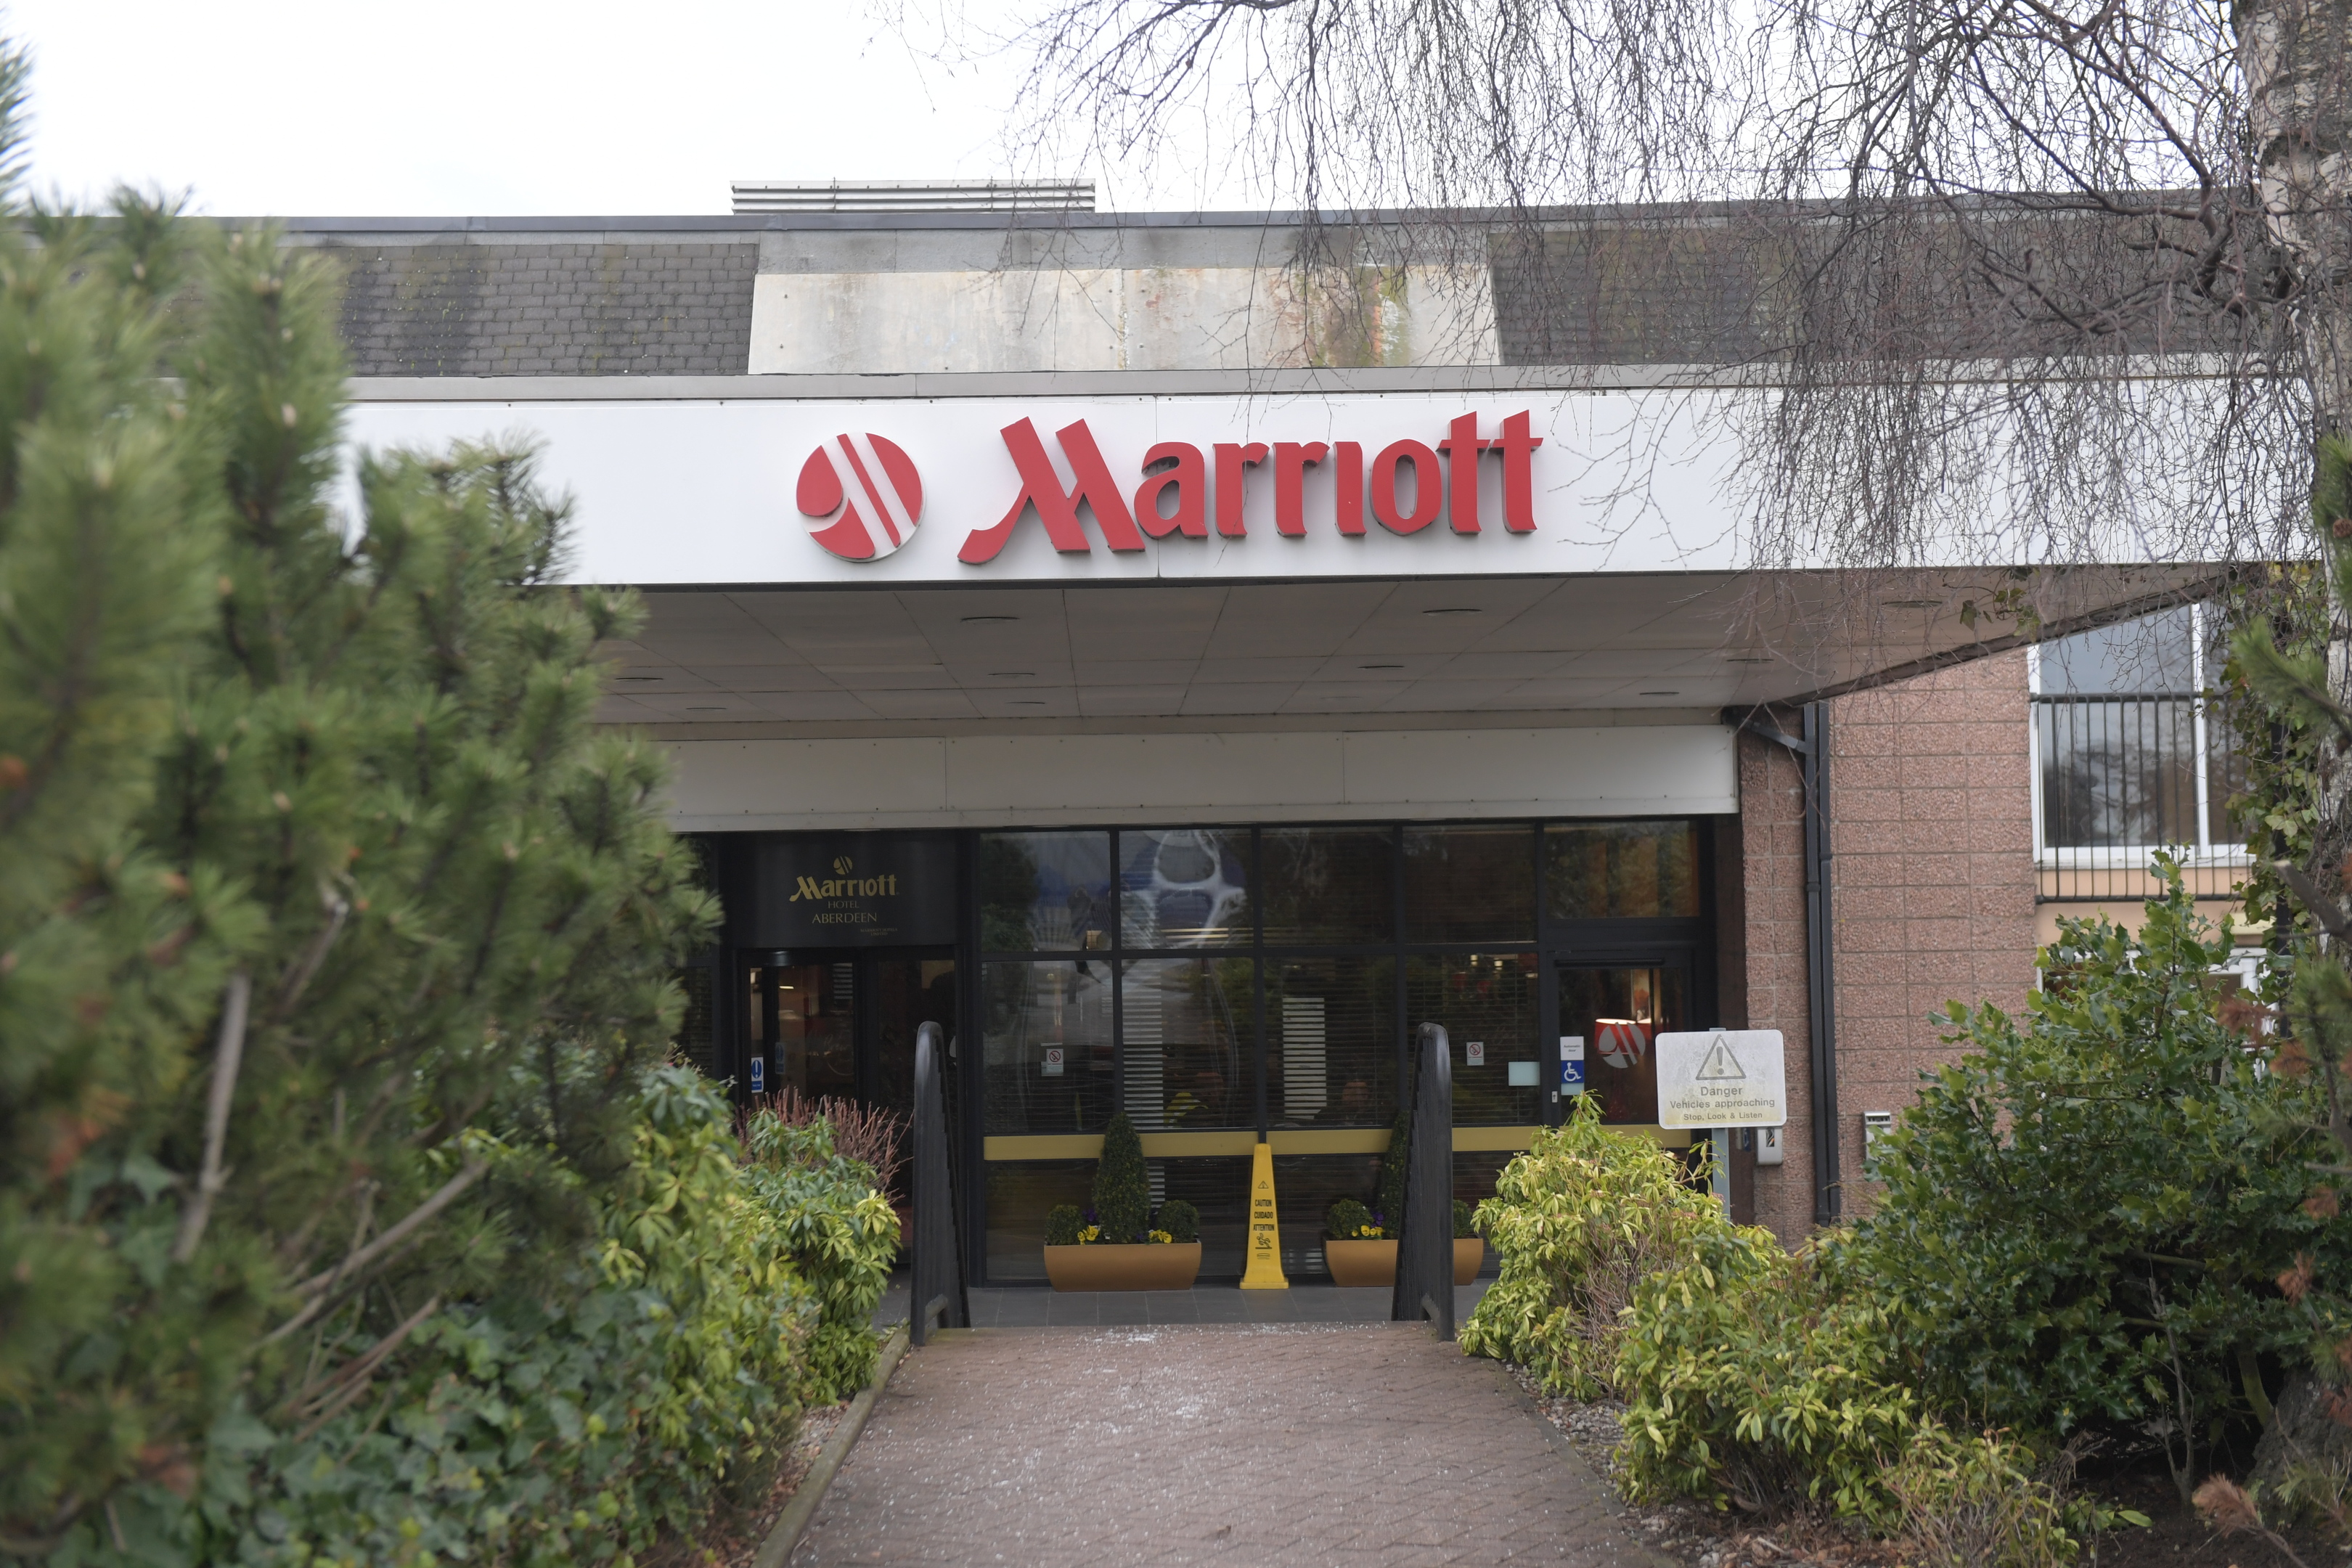 The Marriott Hotel in Dyce